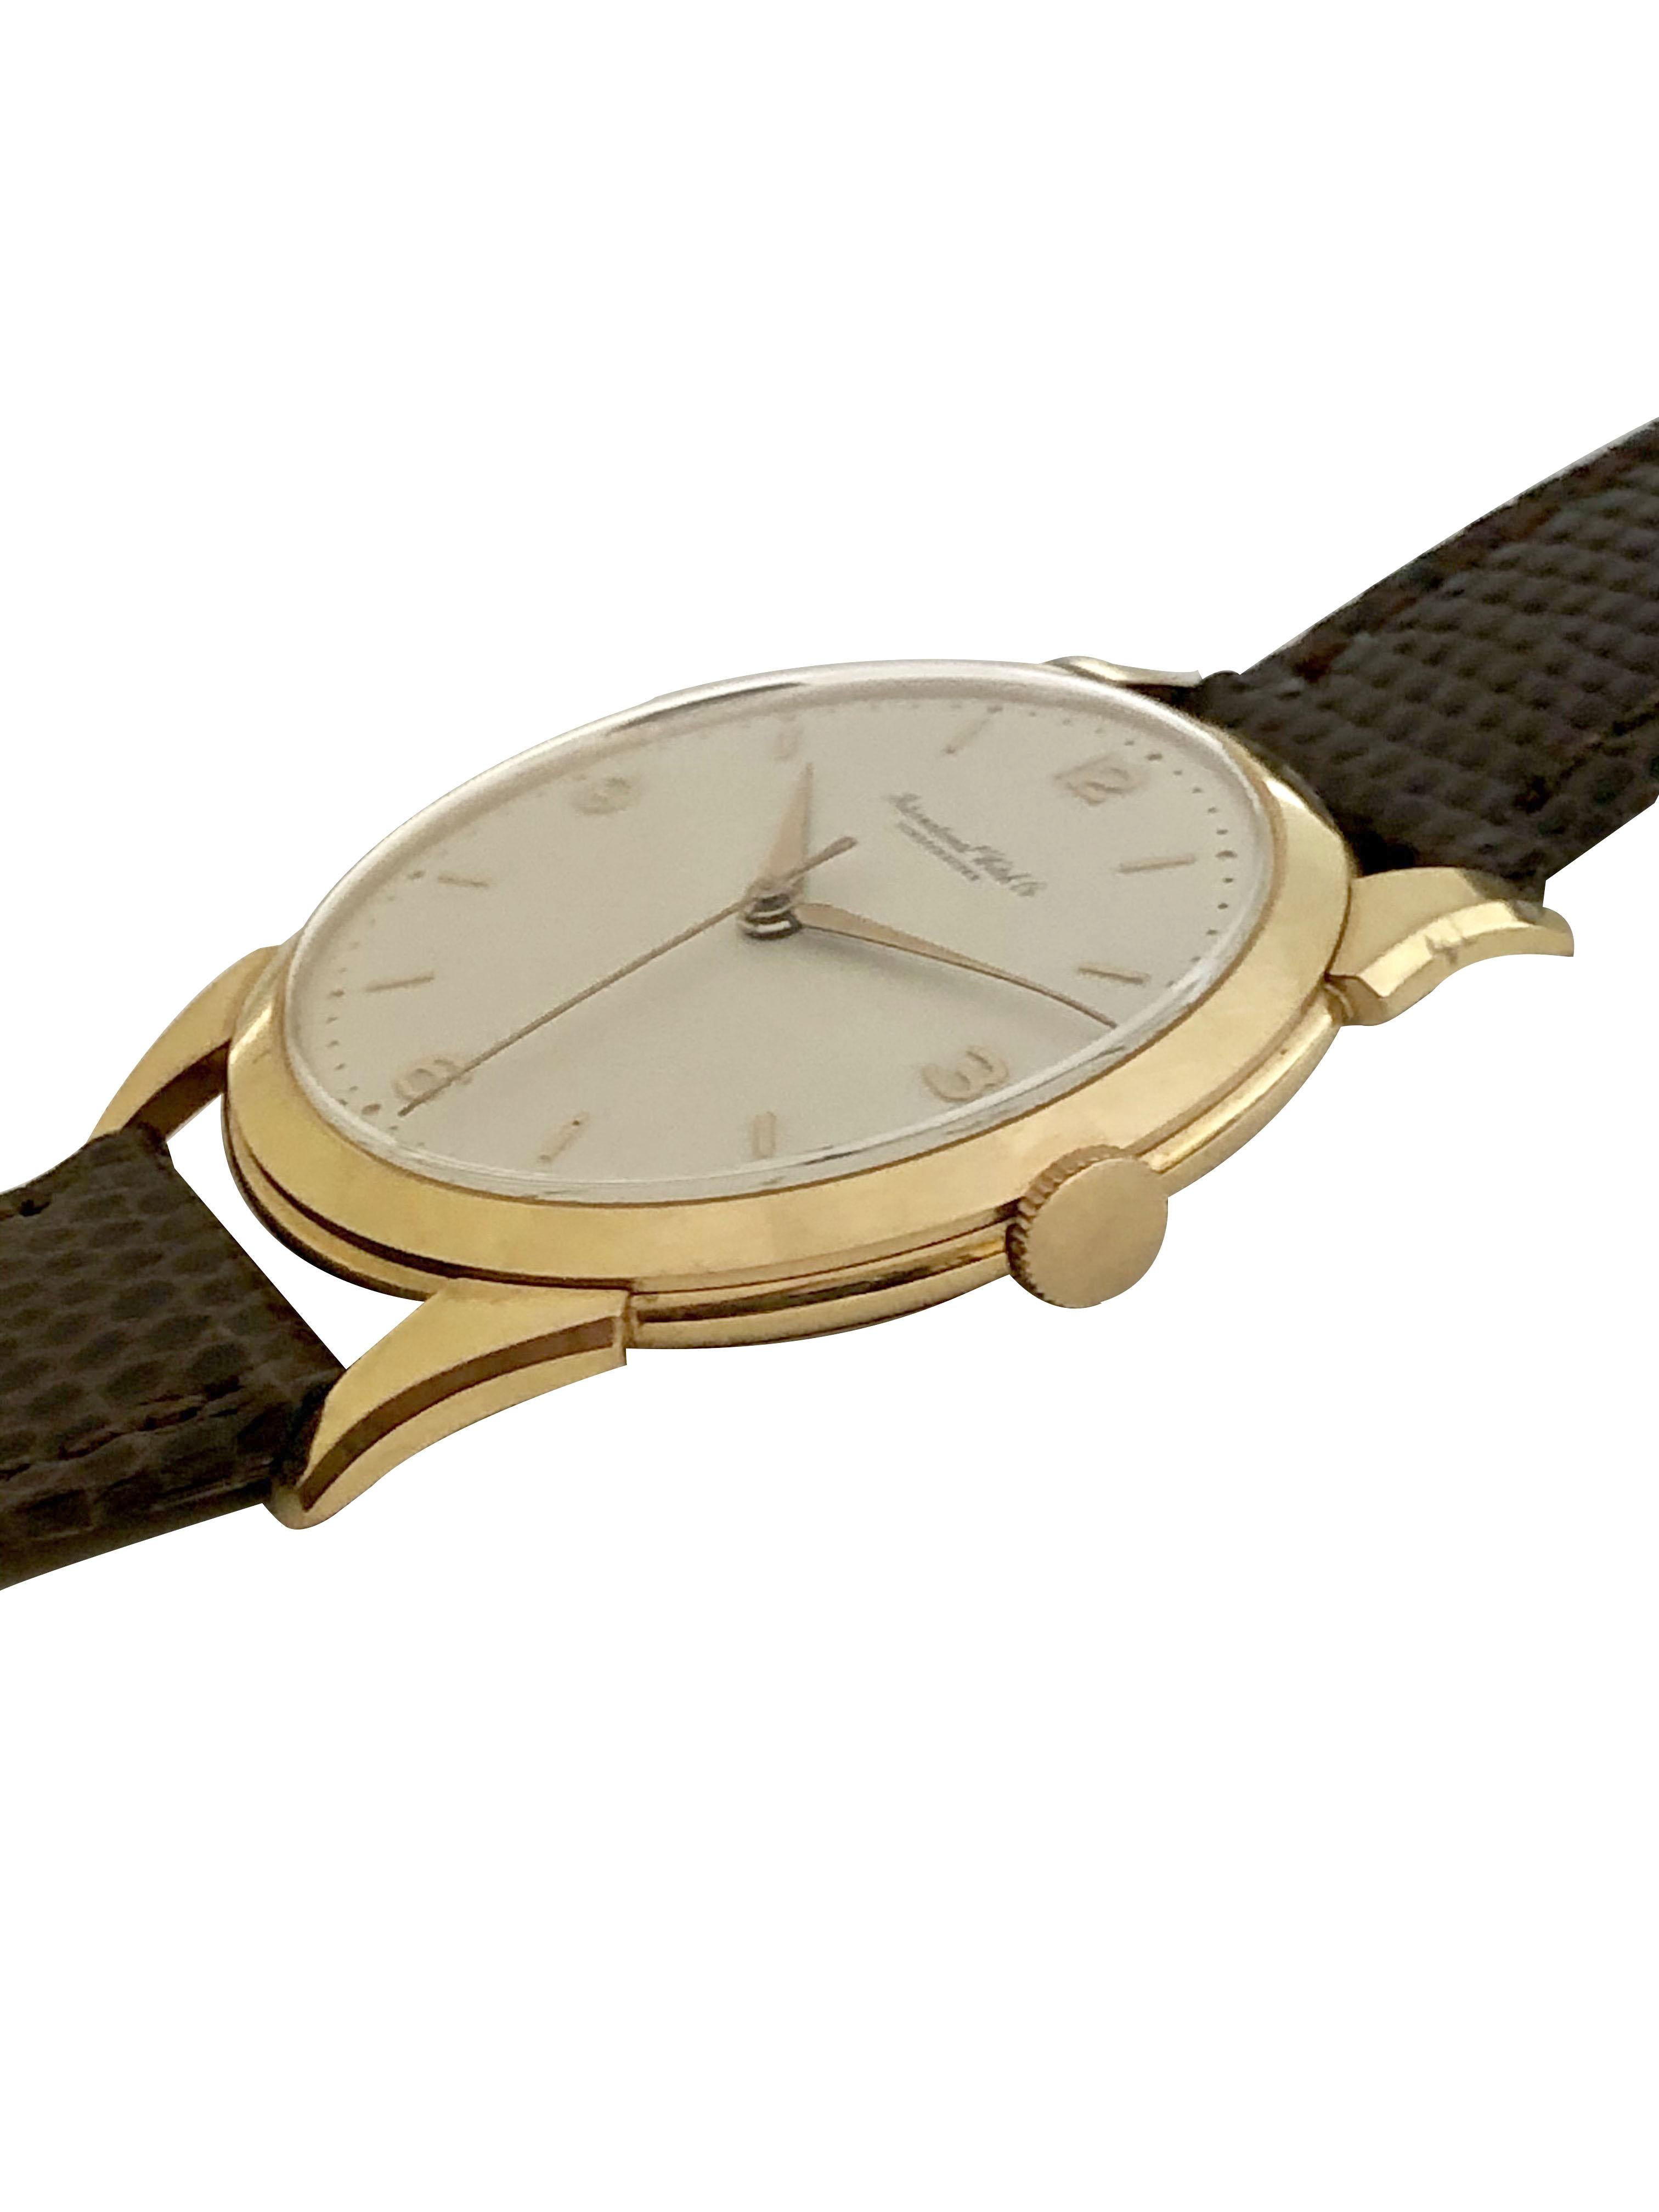 Circa 1950 IWC International Watch Company Wrist Watch, 36 M.M. 3 Piece 18K Yellow Gold Case with Flared lugs. 17 Jewel Nickle Lever mechanical, Manual wind Movement, Original and Mint condition White Matt finished dial with raised Gold markers and